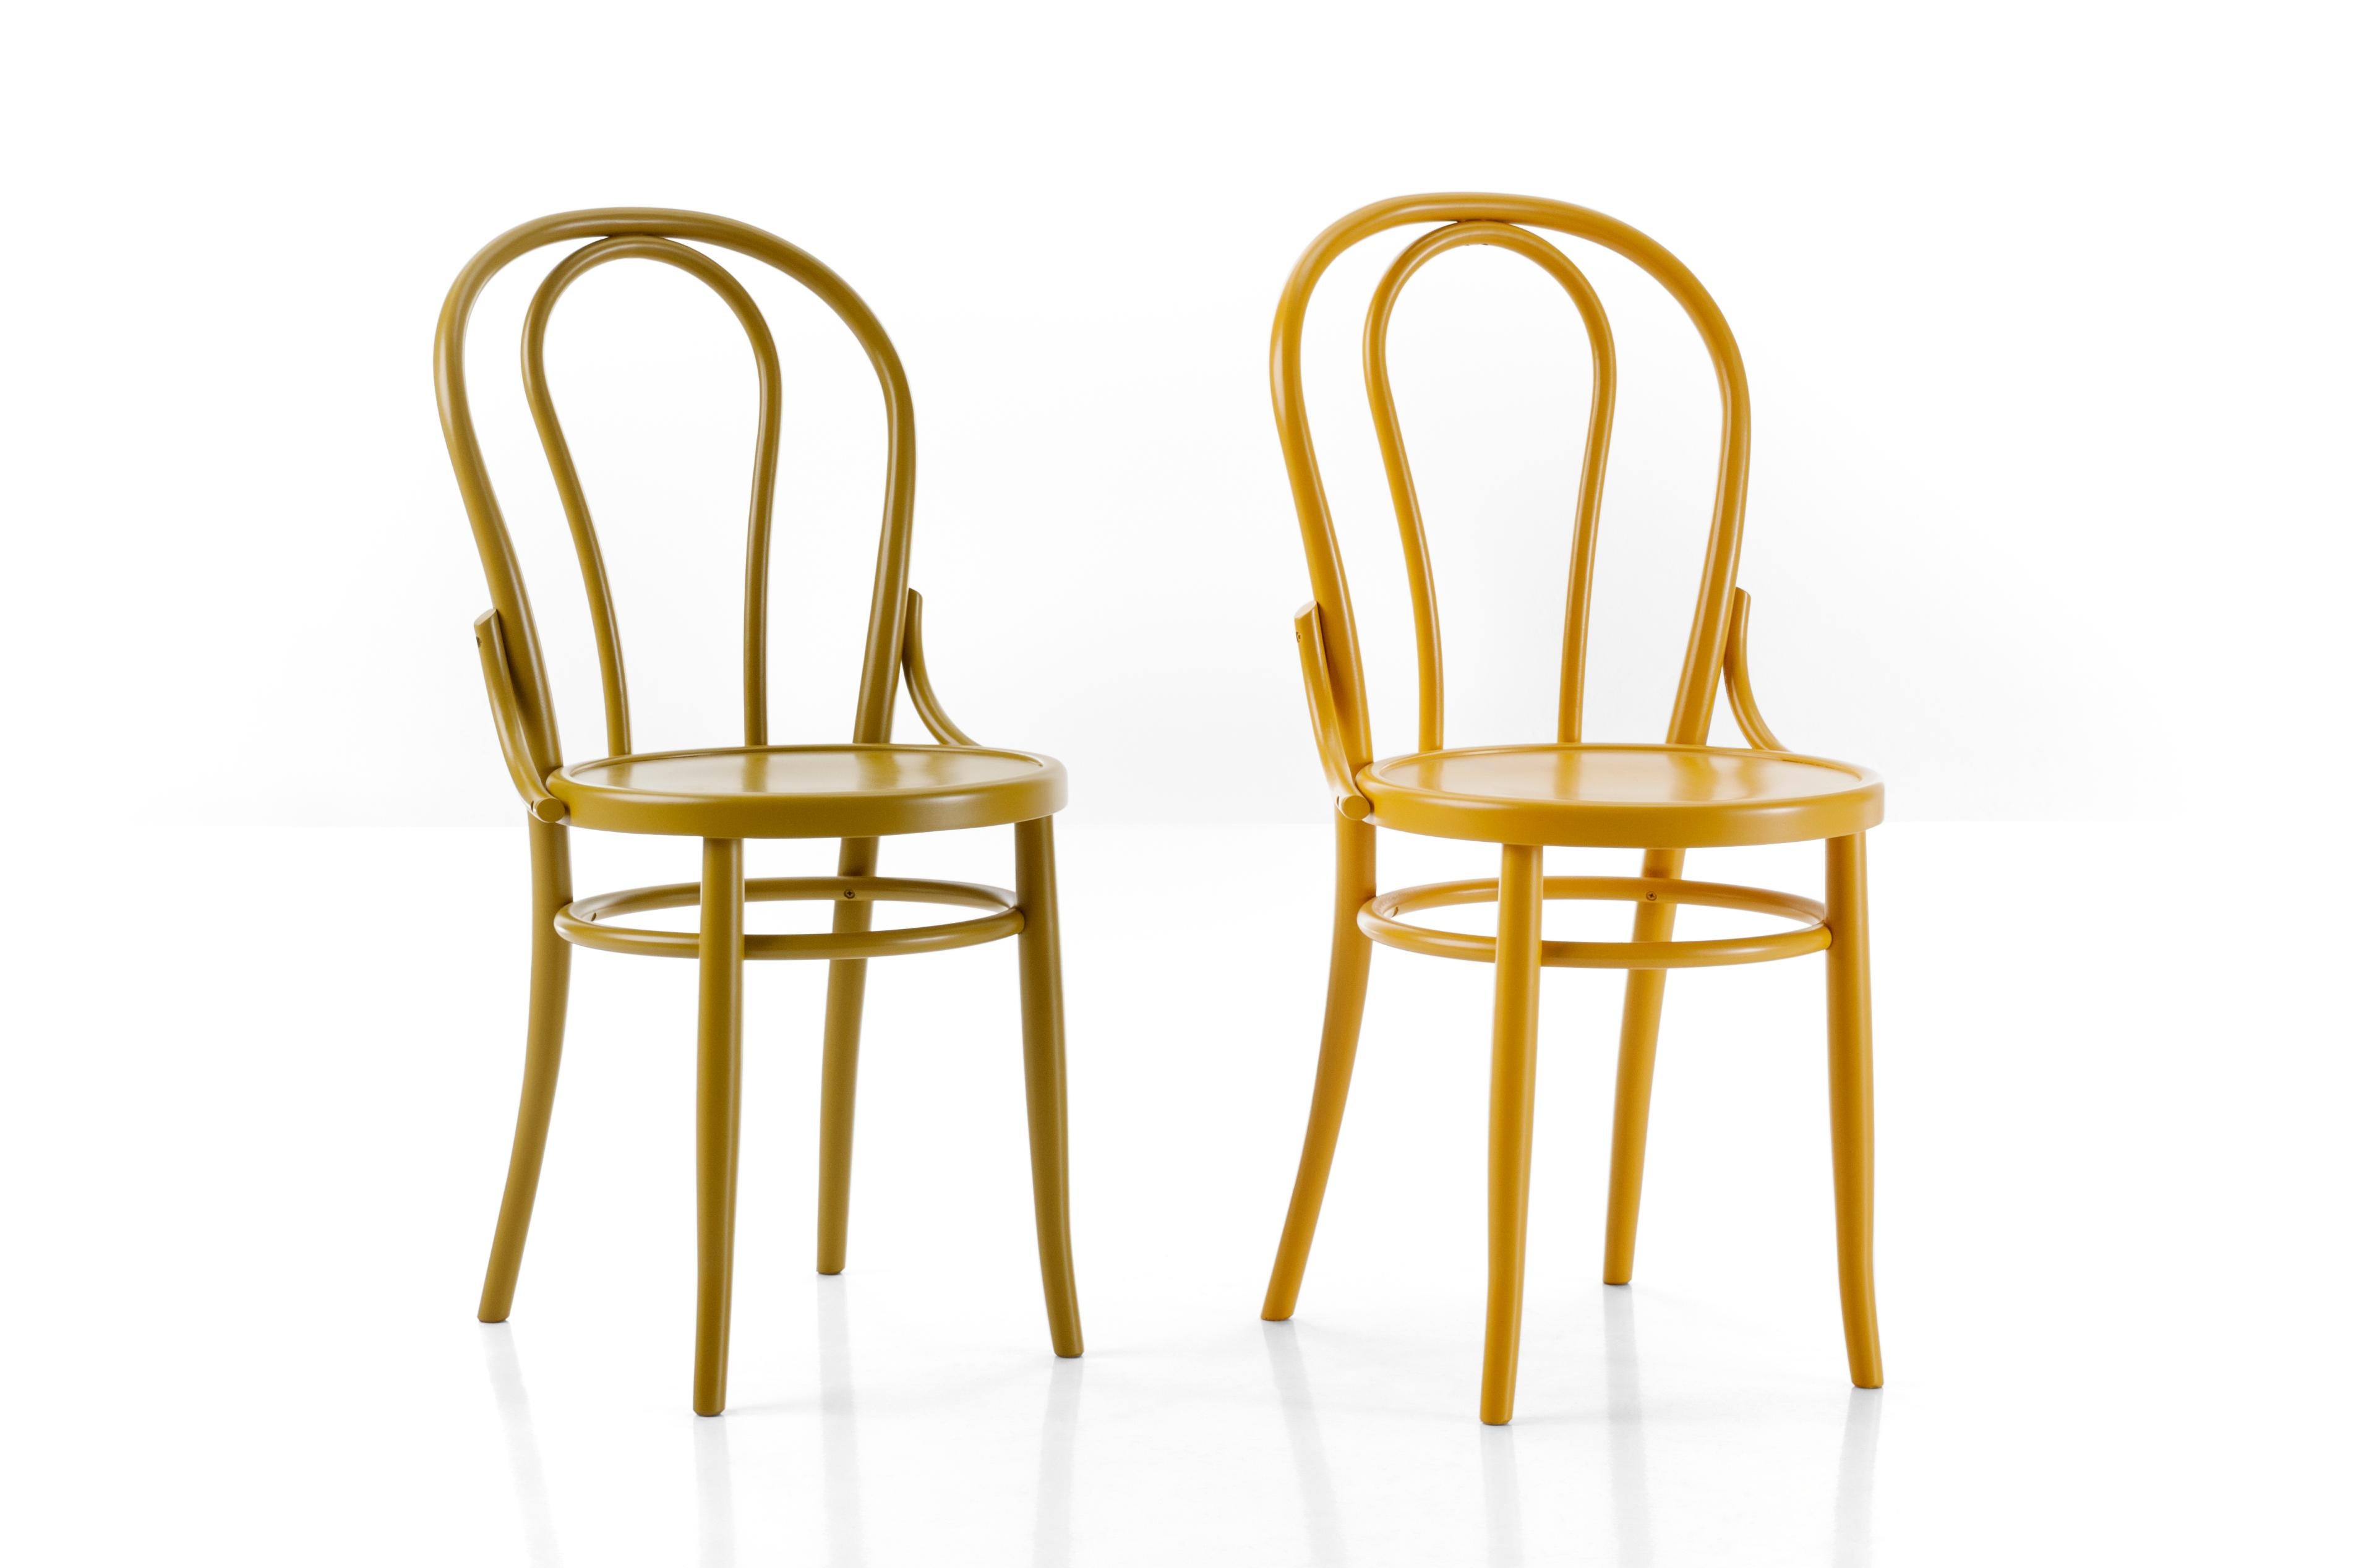 A great classic that made the history of this brand. Conceived by the company during the second half of the nineteenth century to meet the precise needs of practicality, the n°18 is one of the most popular bistro chairs worldwide. The bent element